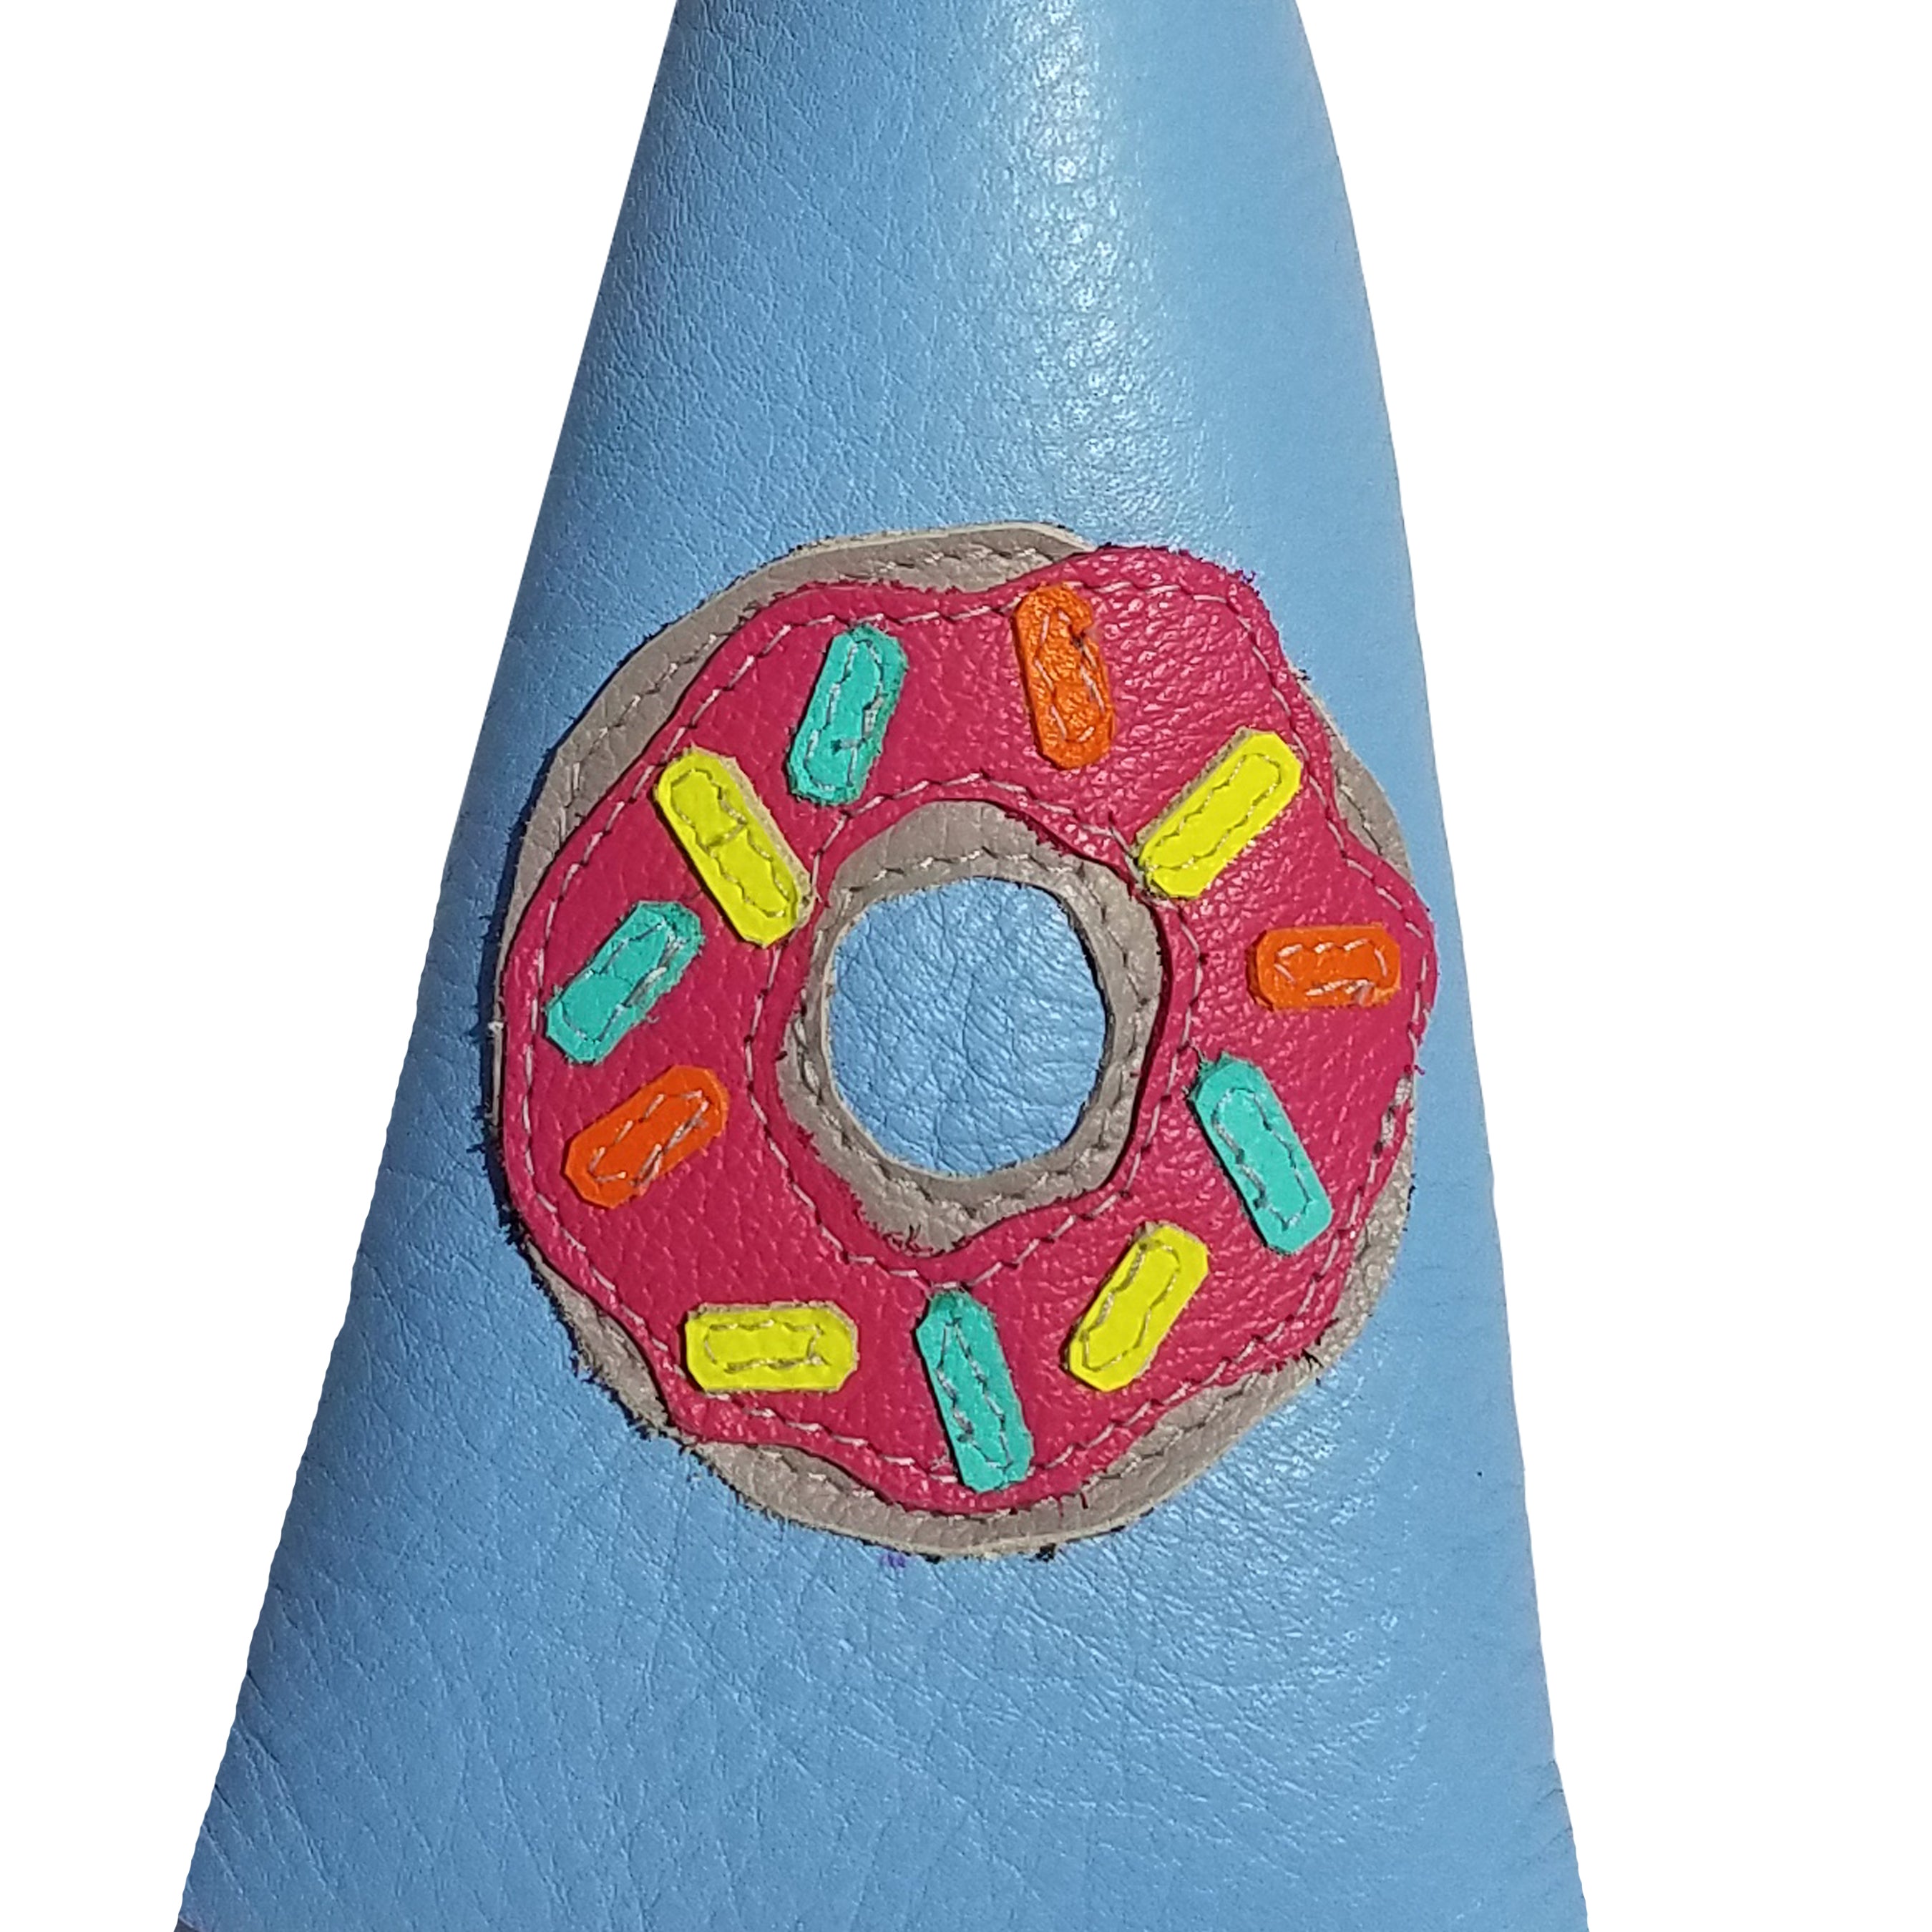 One-Of-A-Kind! The Donut Putter Cover - Robert Mark Golf